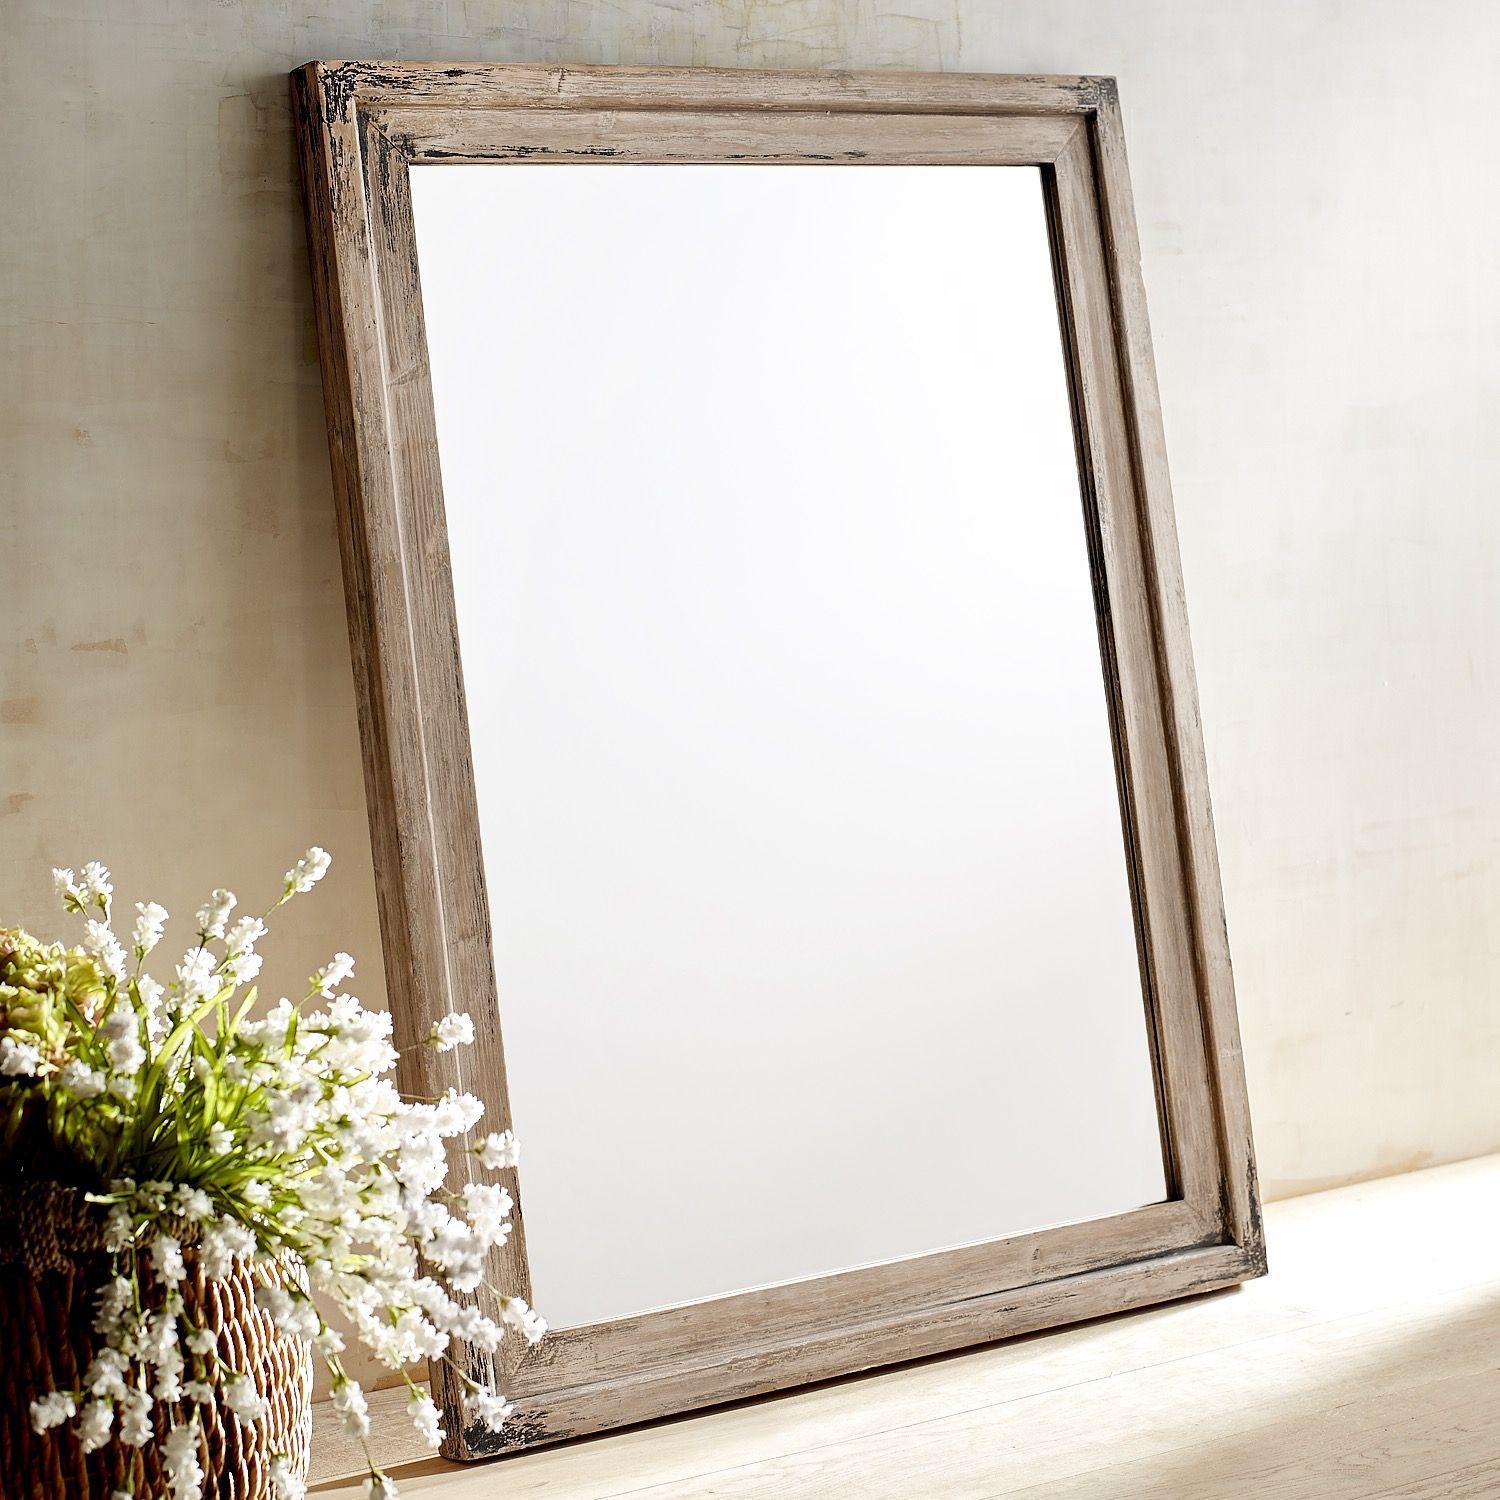 Ville Whitewashed Wood Framed 36x48 Mirror | Wood Framed Mirror With Regard To Gray Washed Wood Wall Mirrors (View 2 of 15)